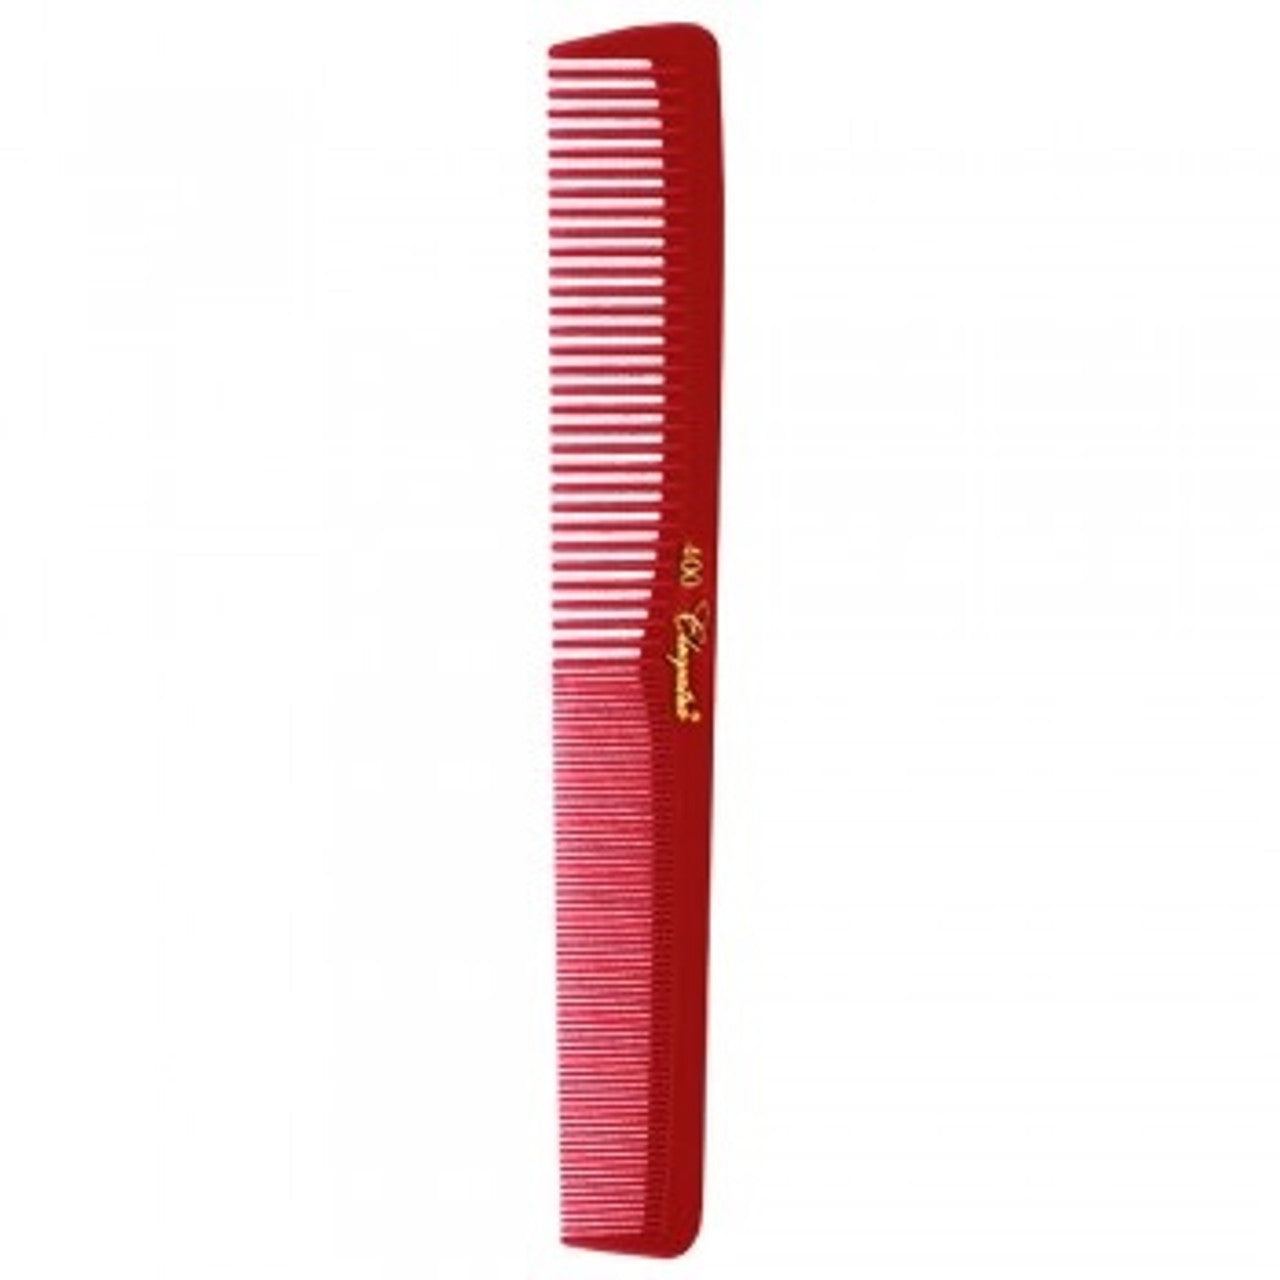 Cleopatra No. 400 7" Styling Comb (12 pack)